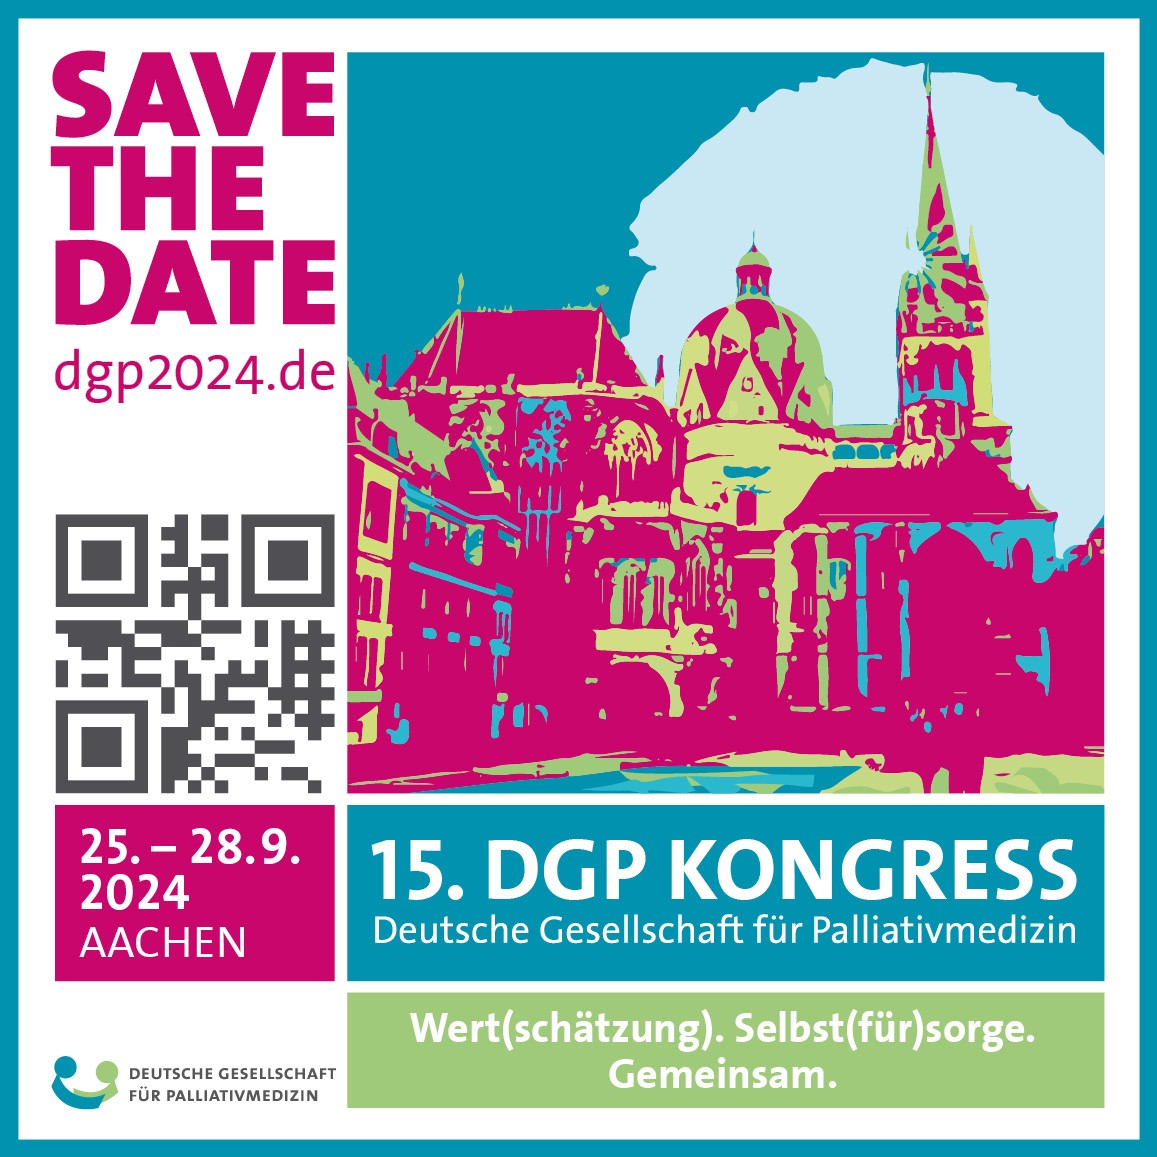 Save the date DGP 2024